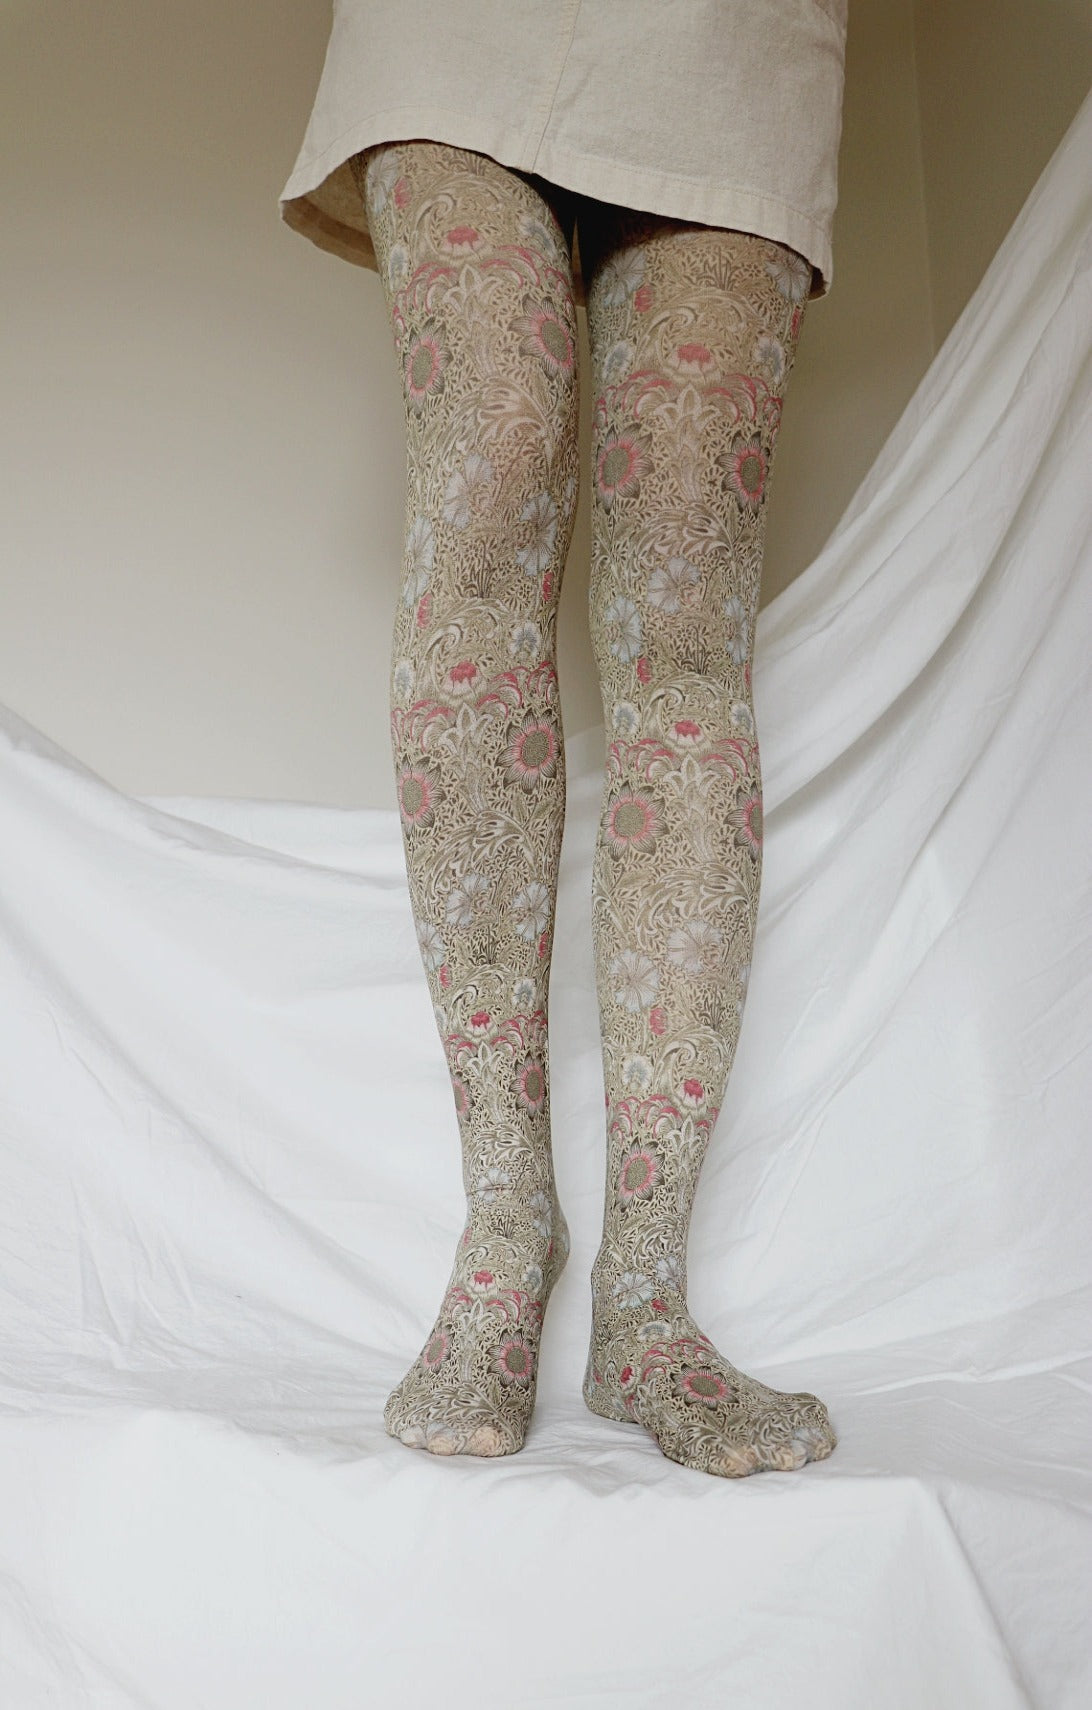 TABBISOCKS brand William Morris collection Corn Cockle tights with an overall floral design and a dull yellow-greenish color